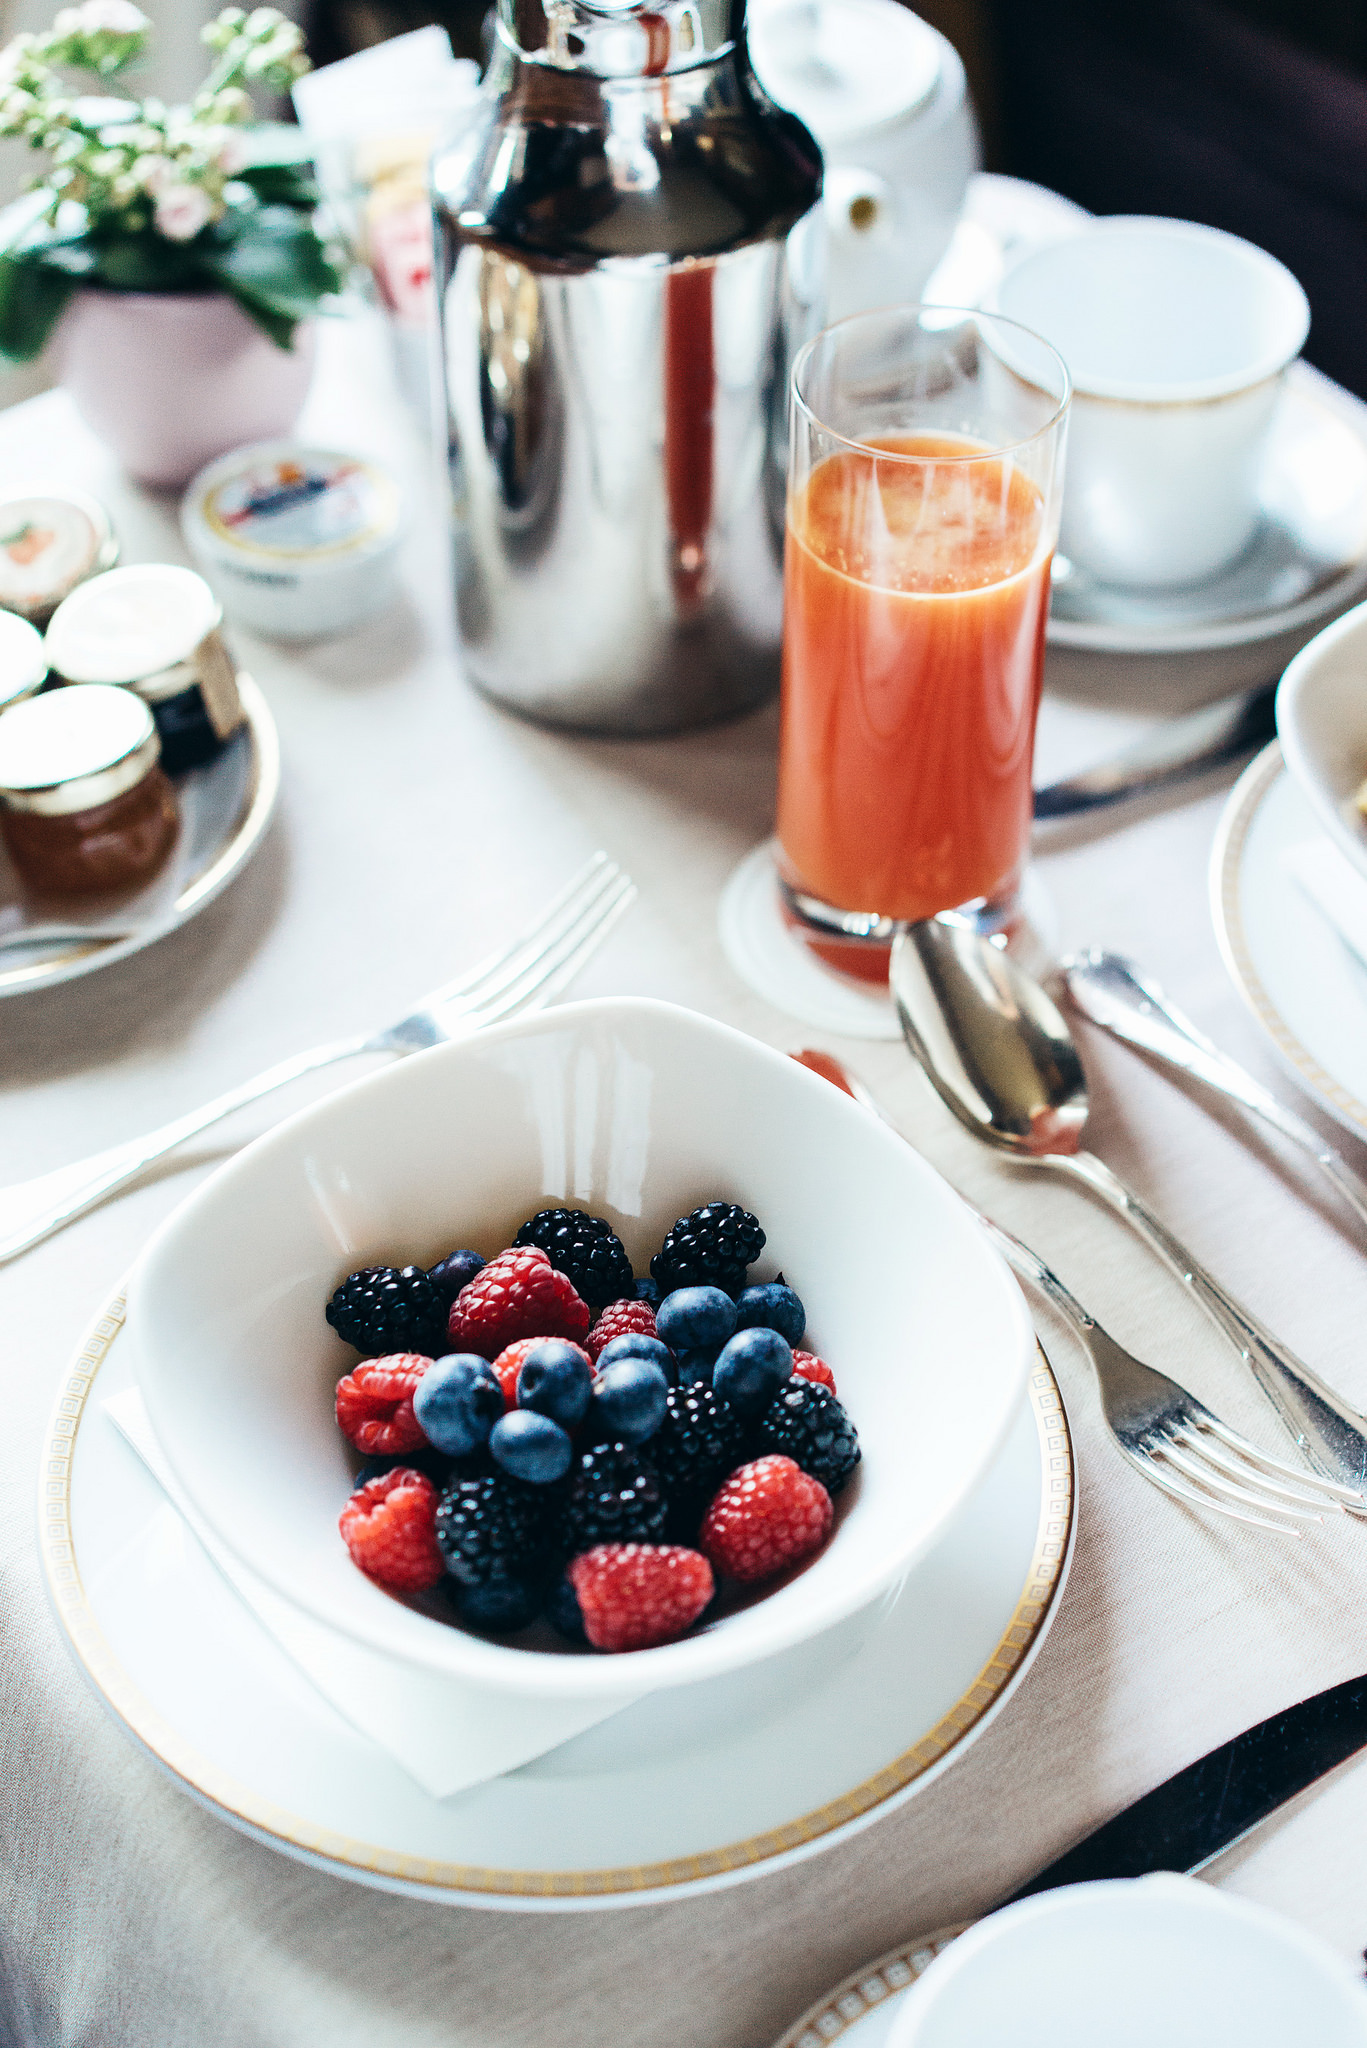 Found: Our Favorite Brunch Spot in London